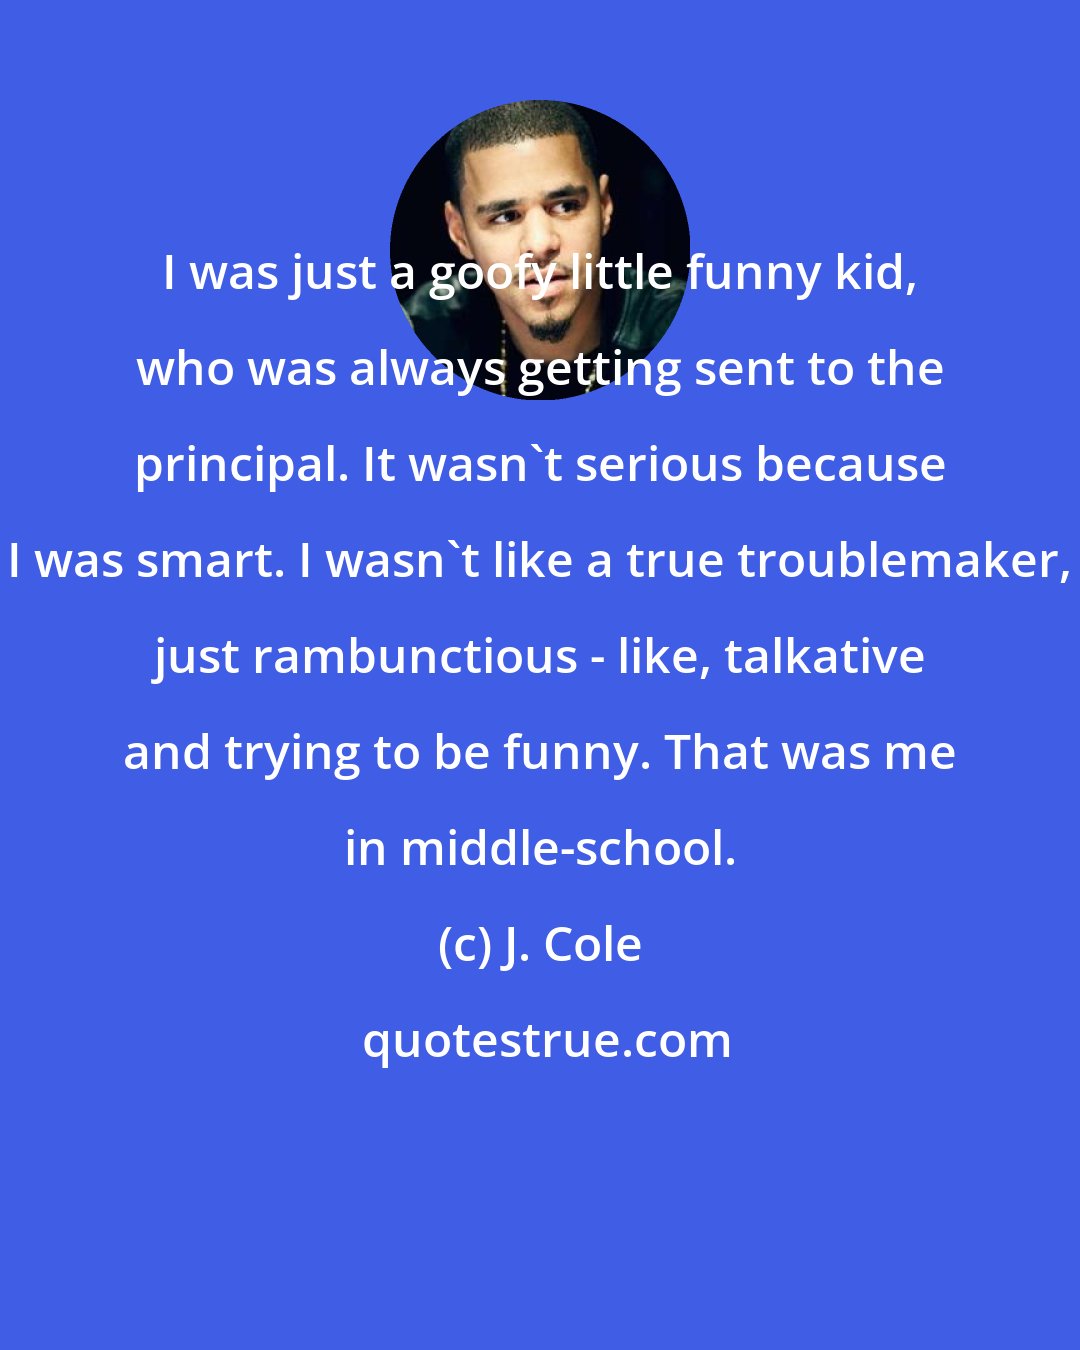 J. Cole: I was just a goofy little funny kid, who was always getting sent to the principal. It wasn't serious because I was smart. I wasn't like a true troublemaker, just rambunctious - like, talkative and trying to be funny. That was me in middle-school.